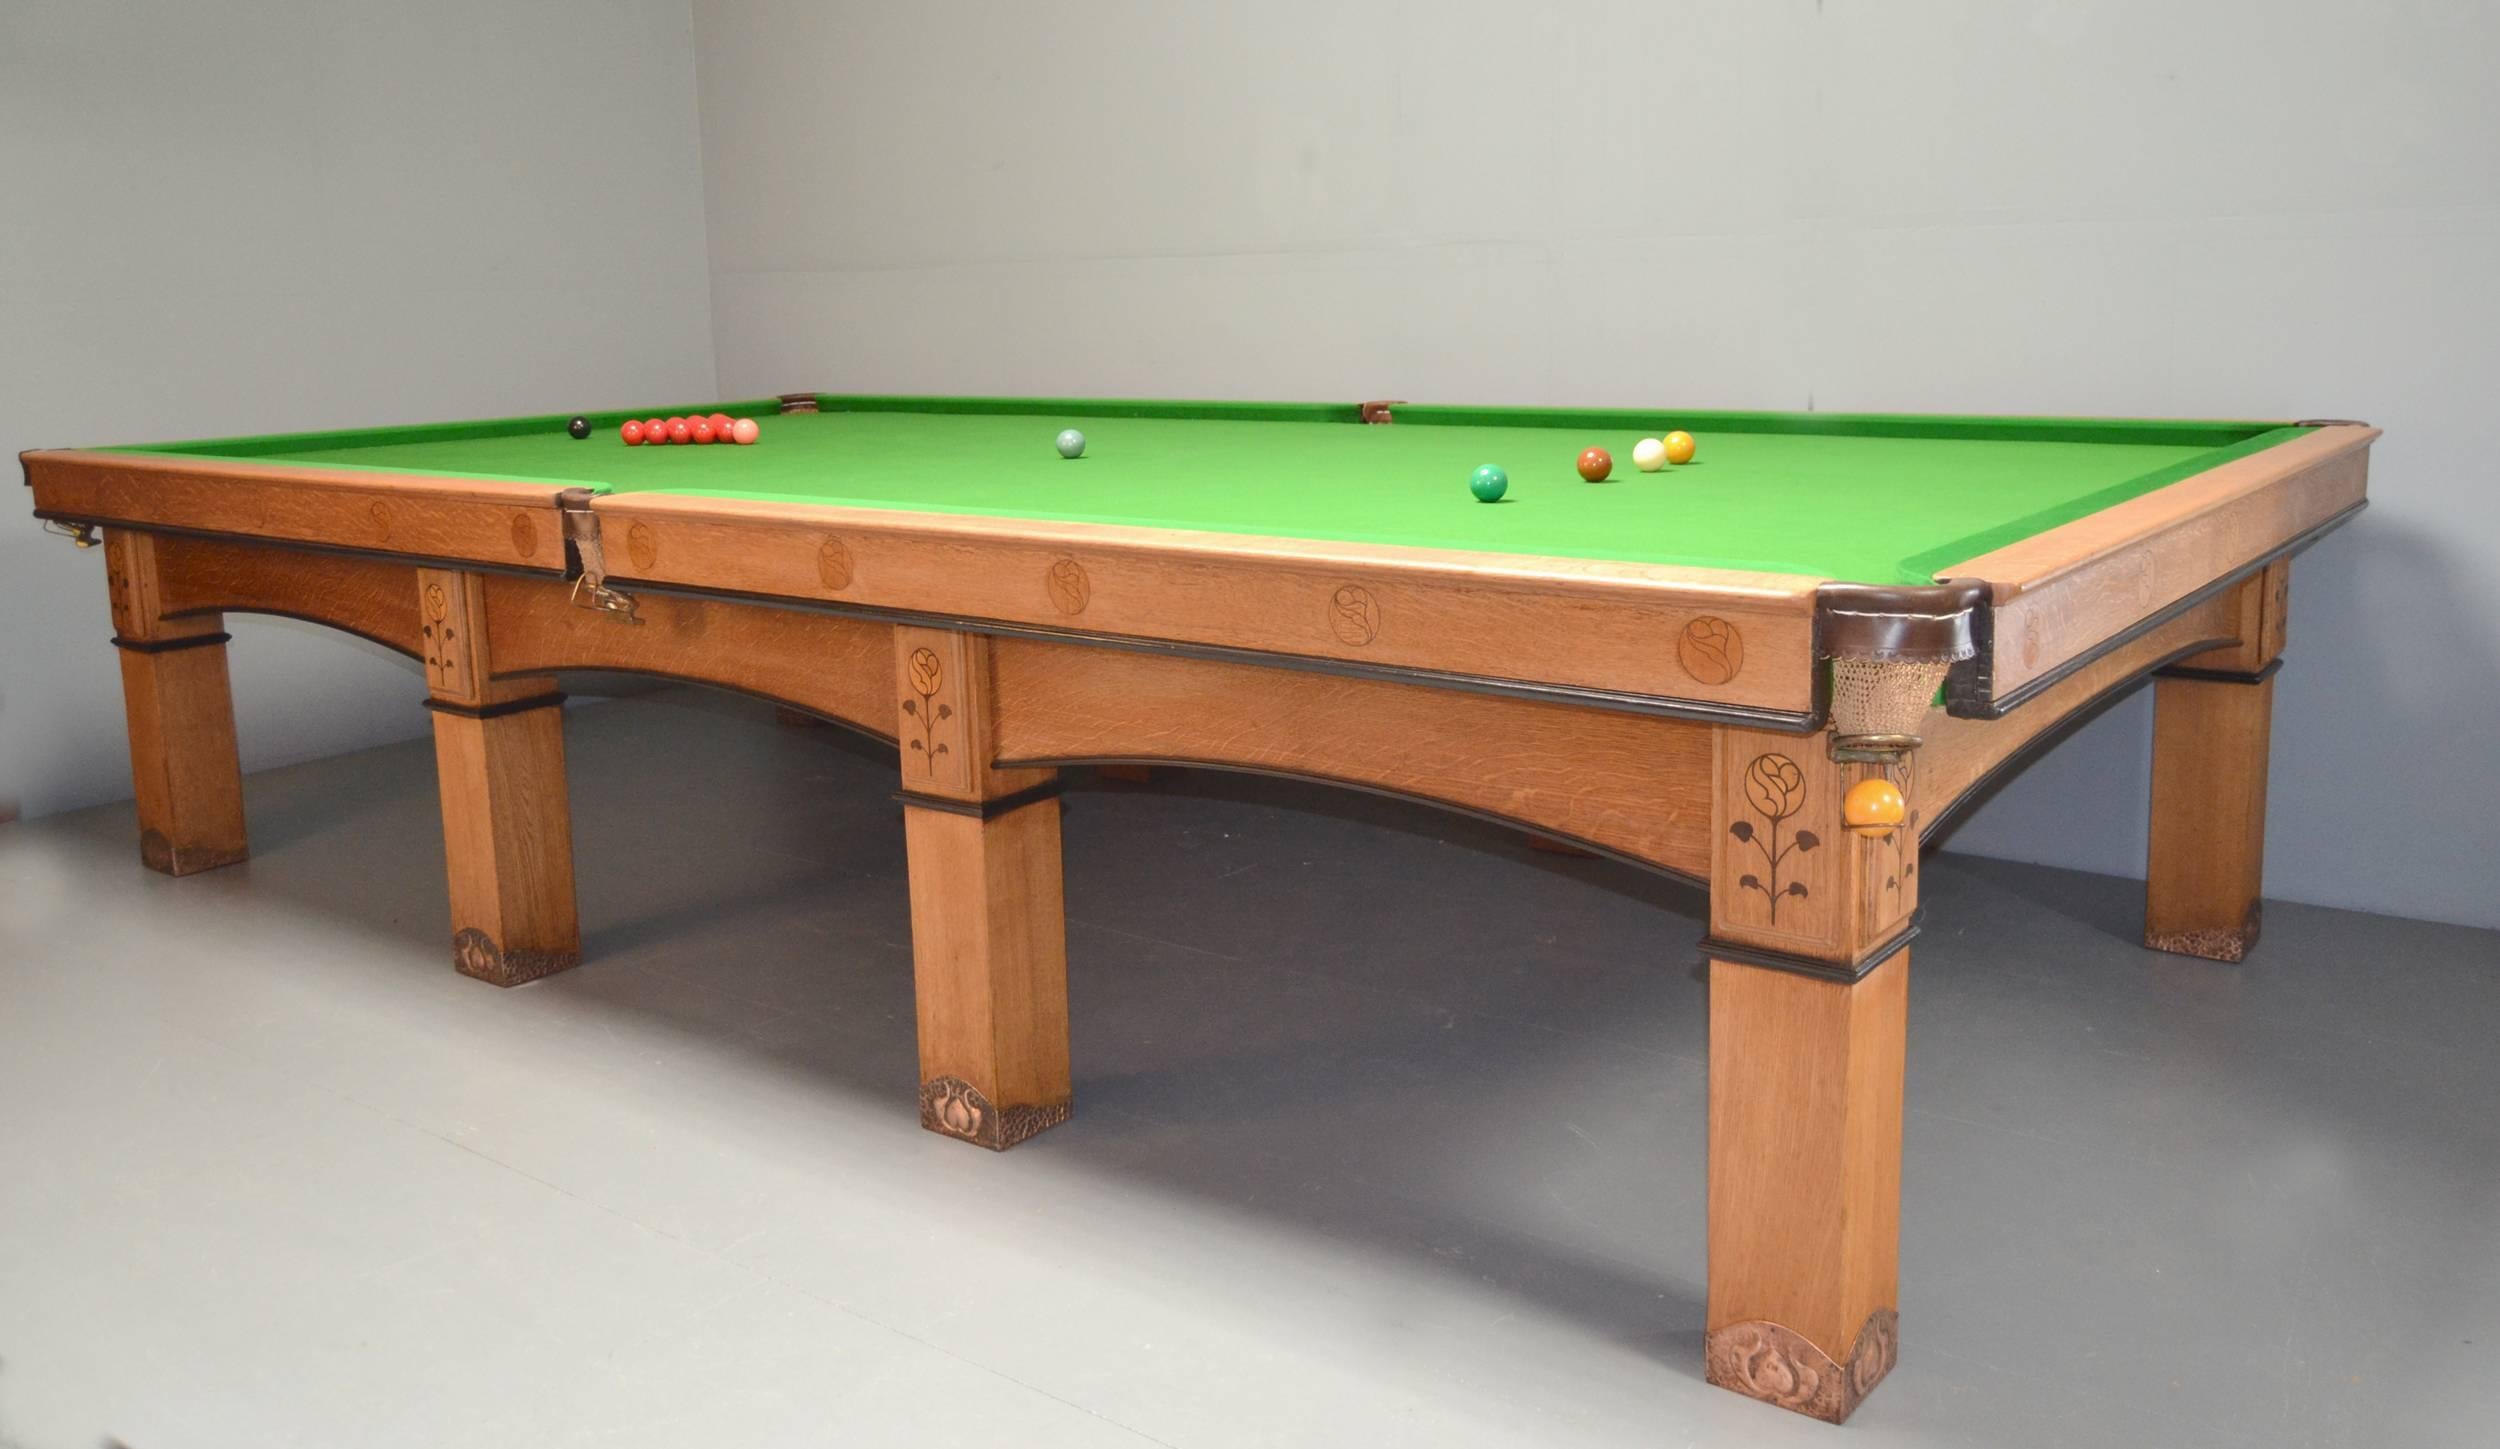 Billiard snooker pool table oak inlaid arts and crafts glasgow school scotland For Sale 1